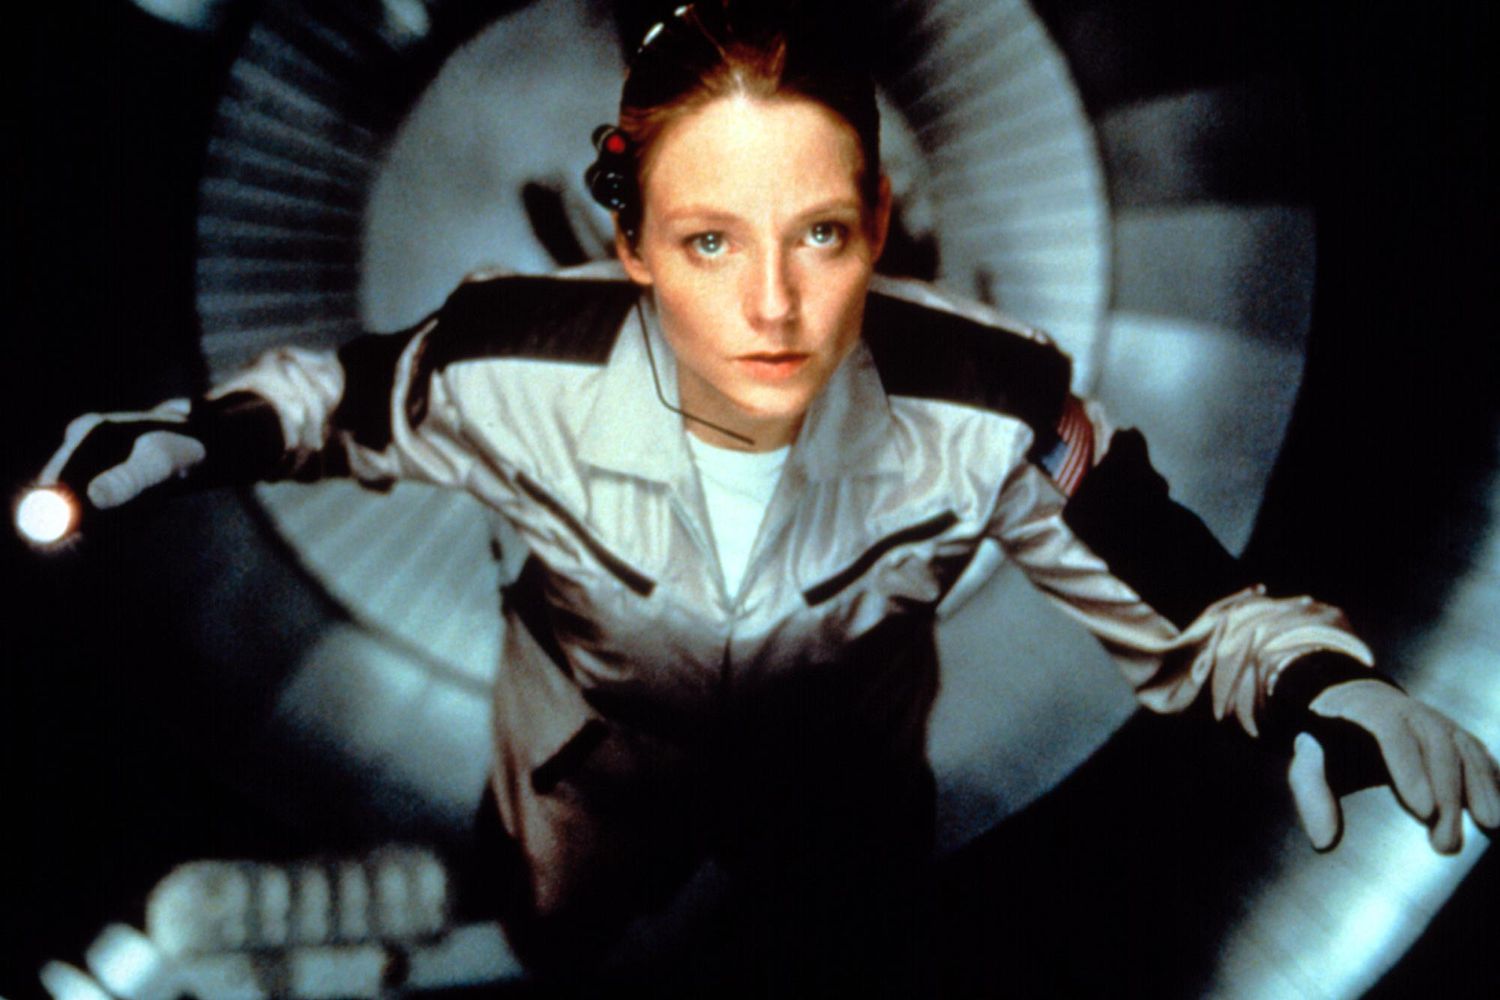 CONTACT, Jodie Foster